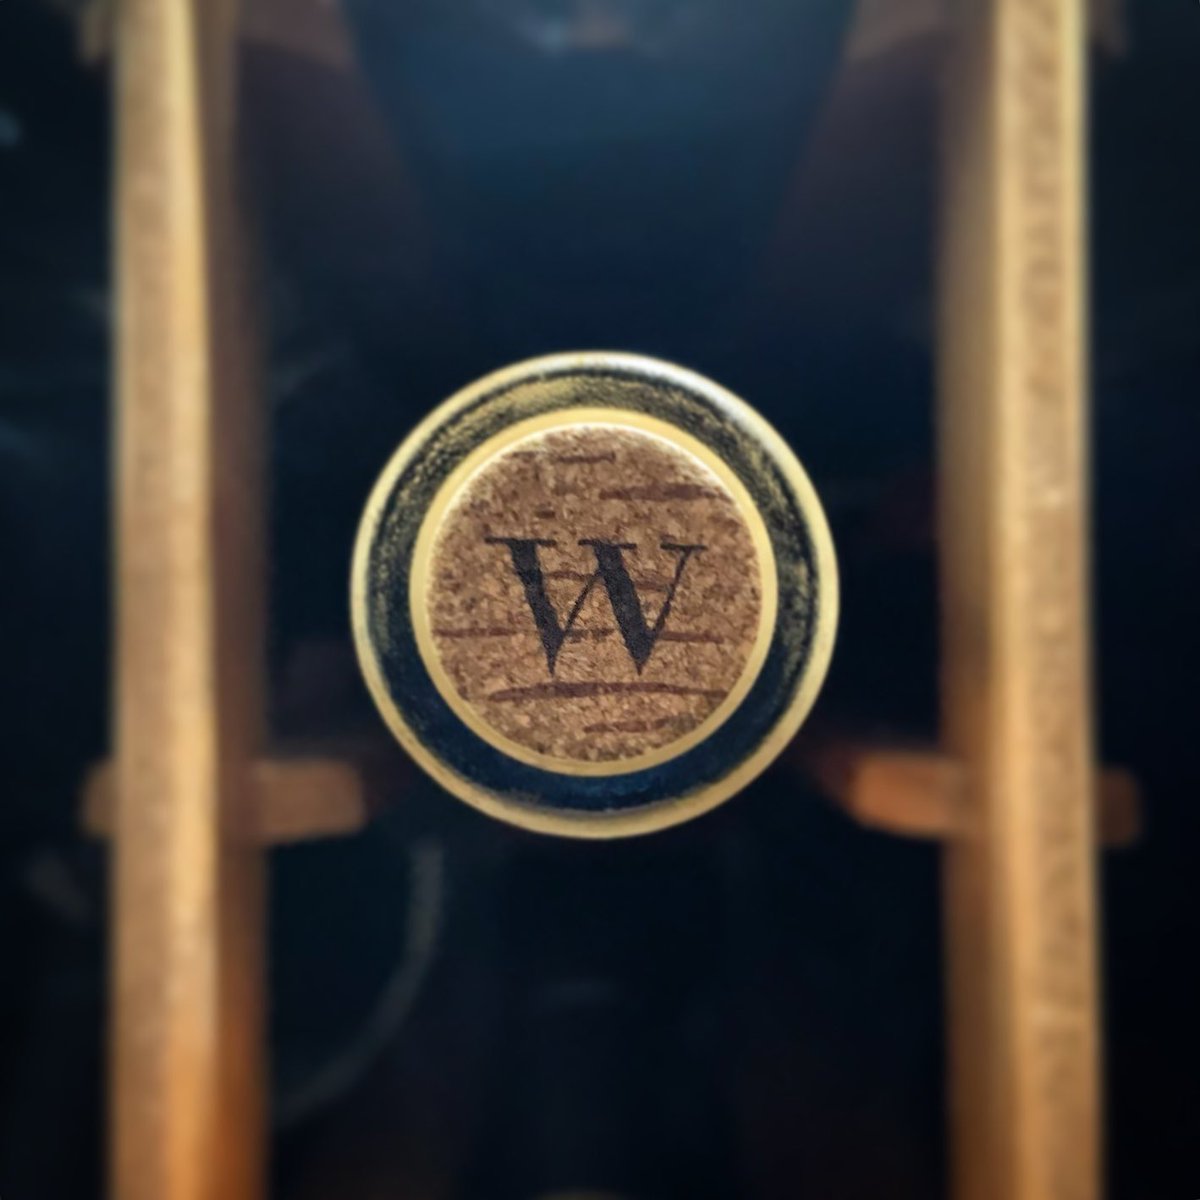 'Through our selection of single-vineyard #PinotNoir, we aim to show the diversity of flavors and characteristics of one region, contemplating the influence of fog, ocean, mountains, forest and hillside across #MendocinoCounty.' ~ @WaitsMast 

#wine #quote #winery #smalllotwines